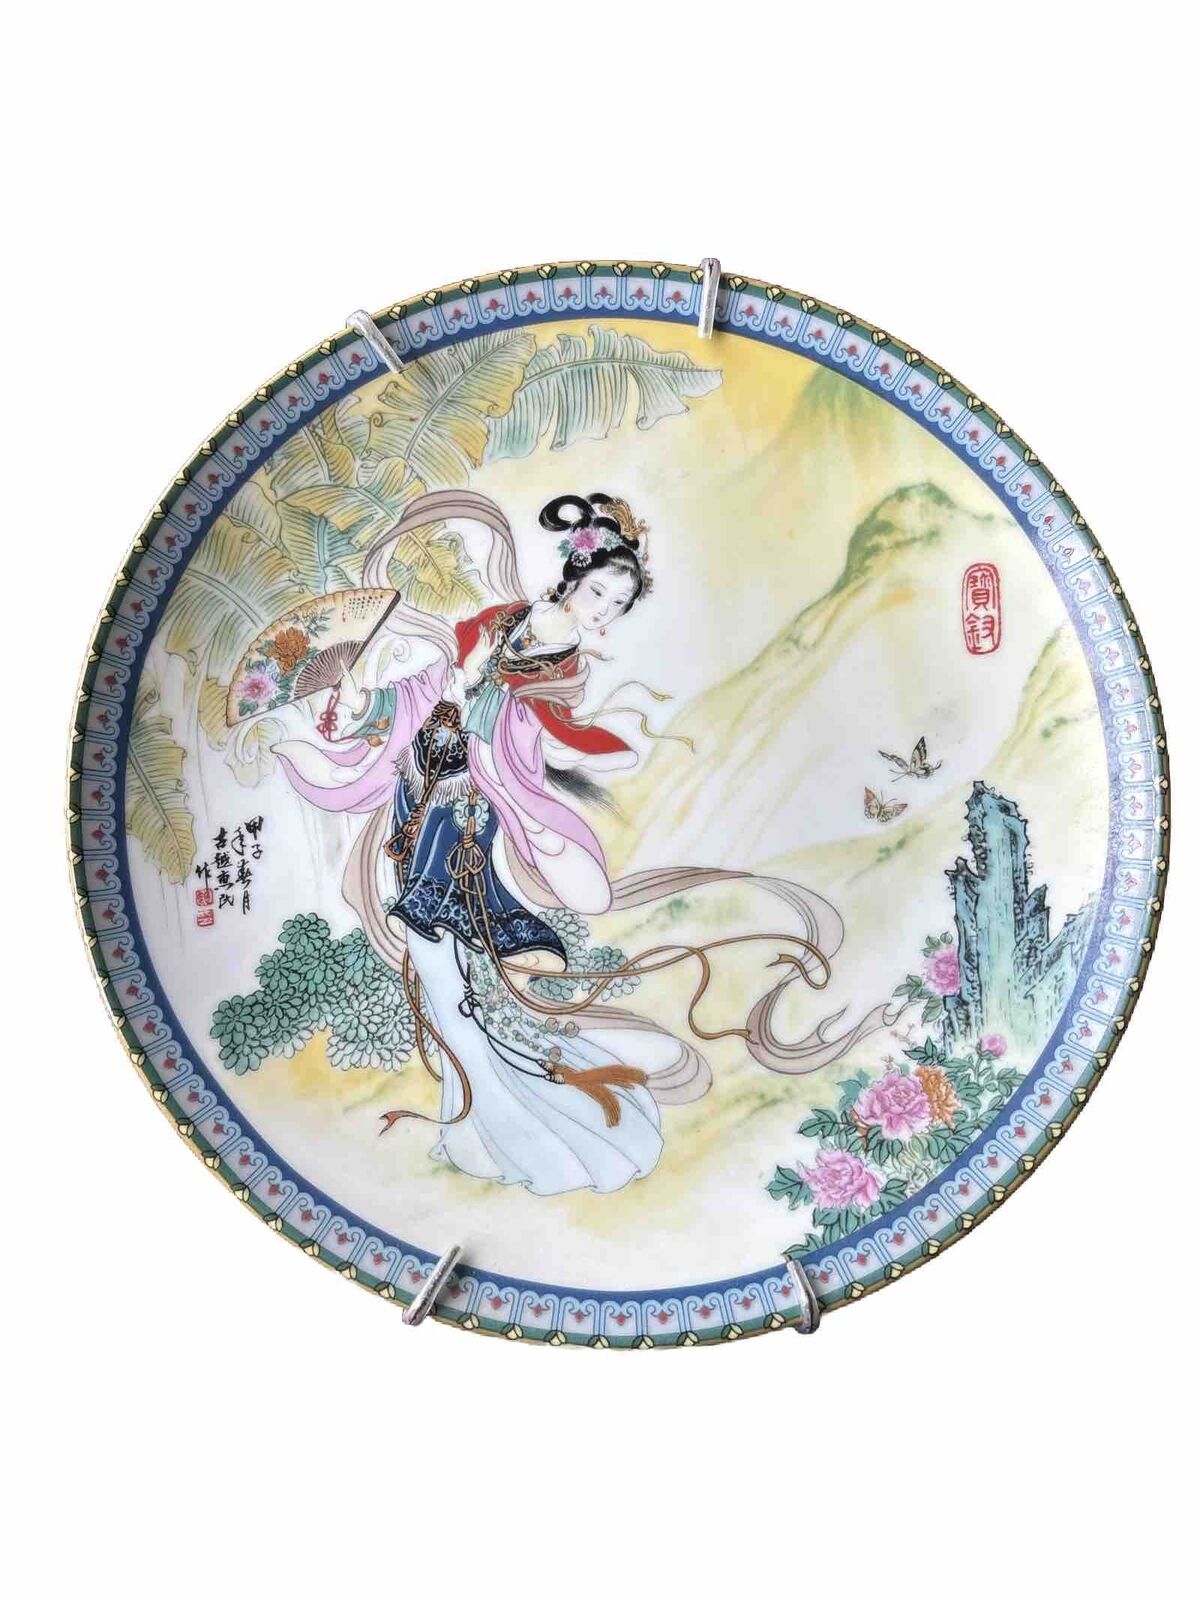 Imperial Jingdezhen Porcelain Collector Plate dated 1985 Geisha with Fan